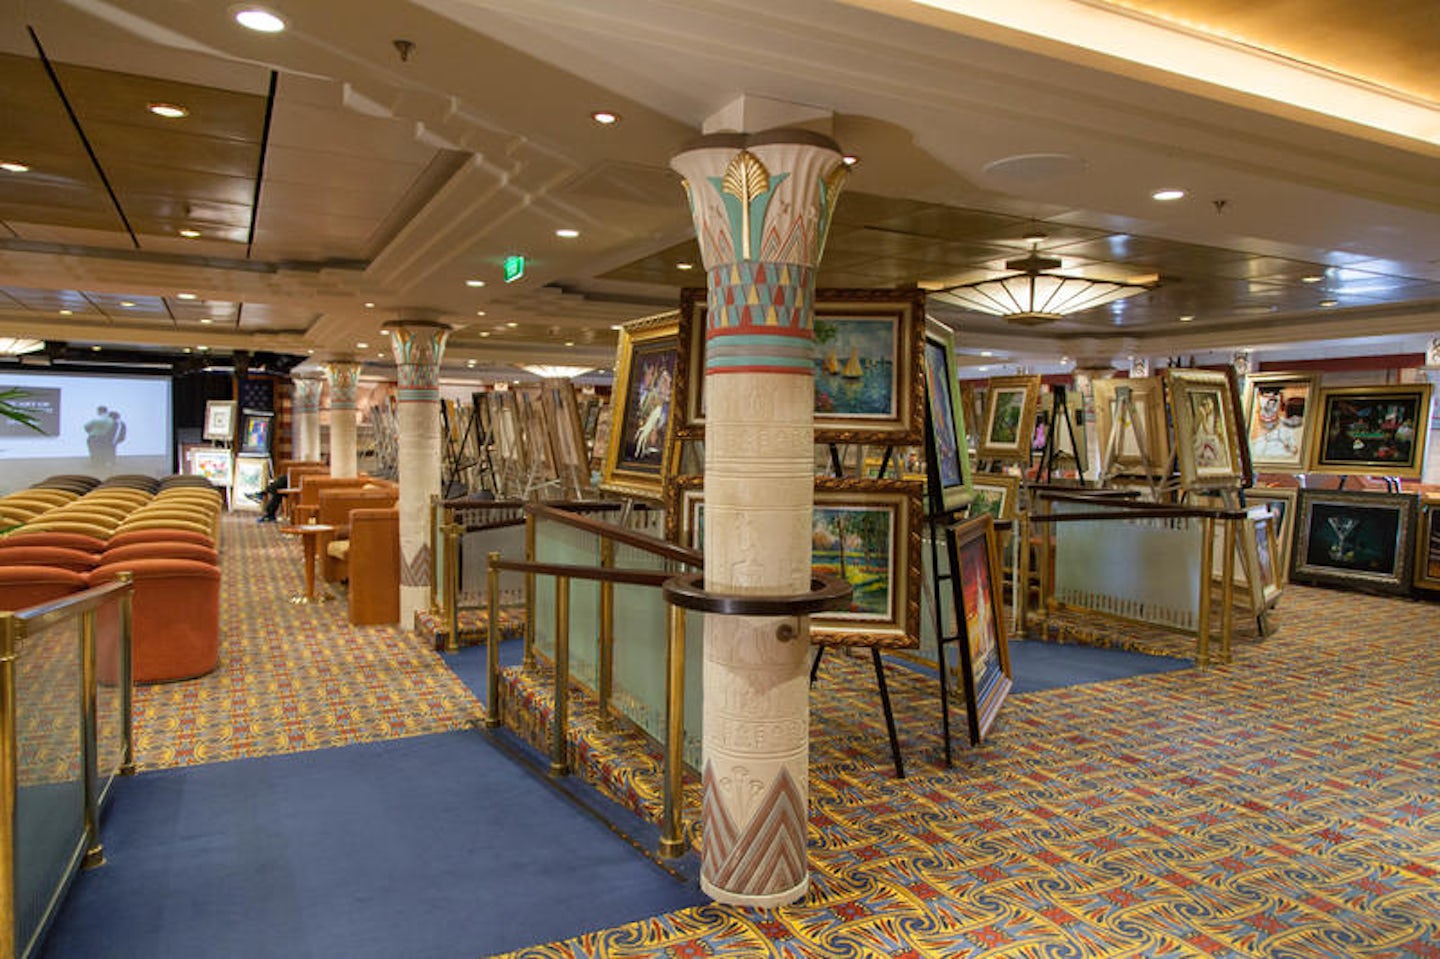 Seminar for Art Collectors on Independence of the Seas